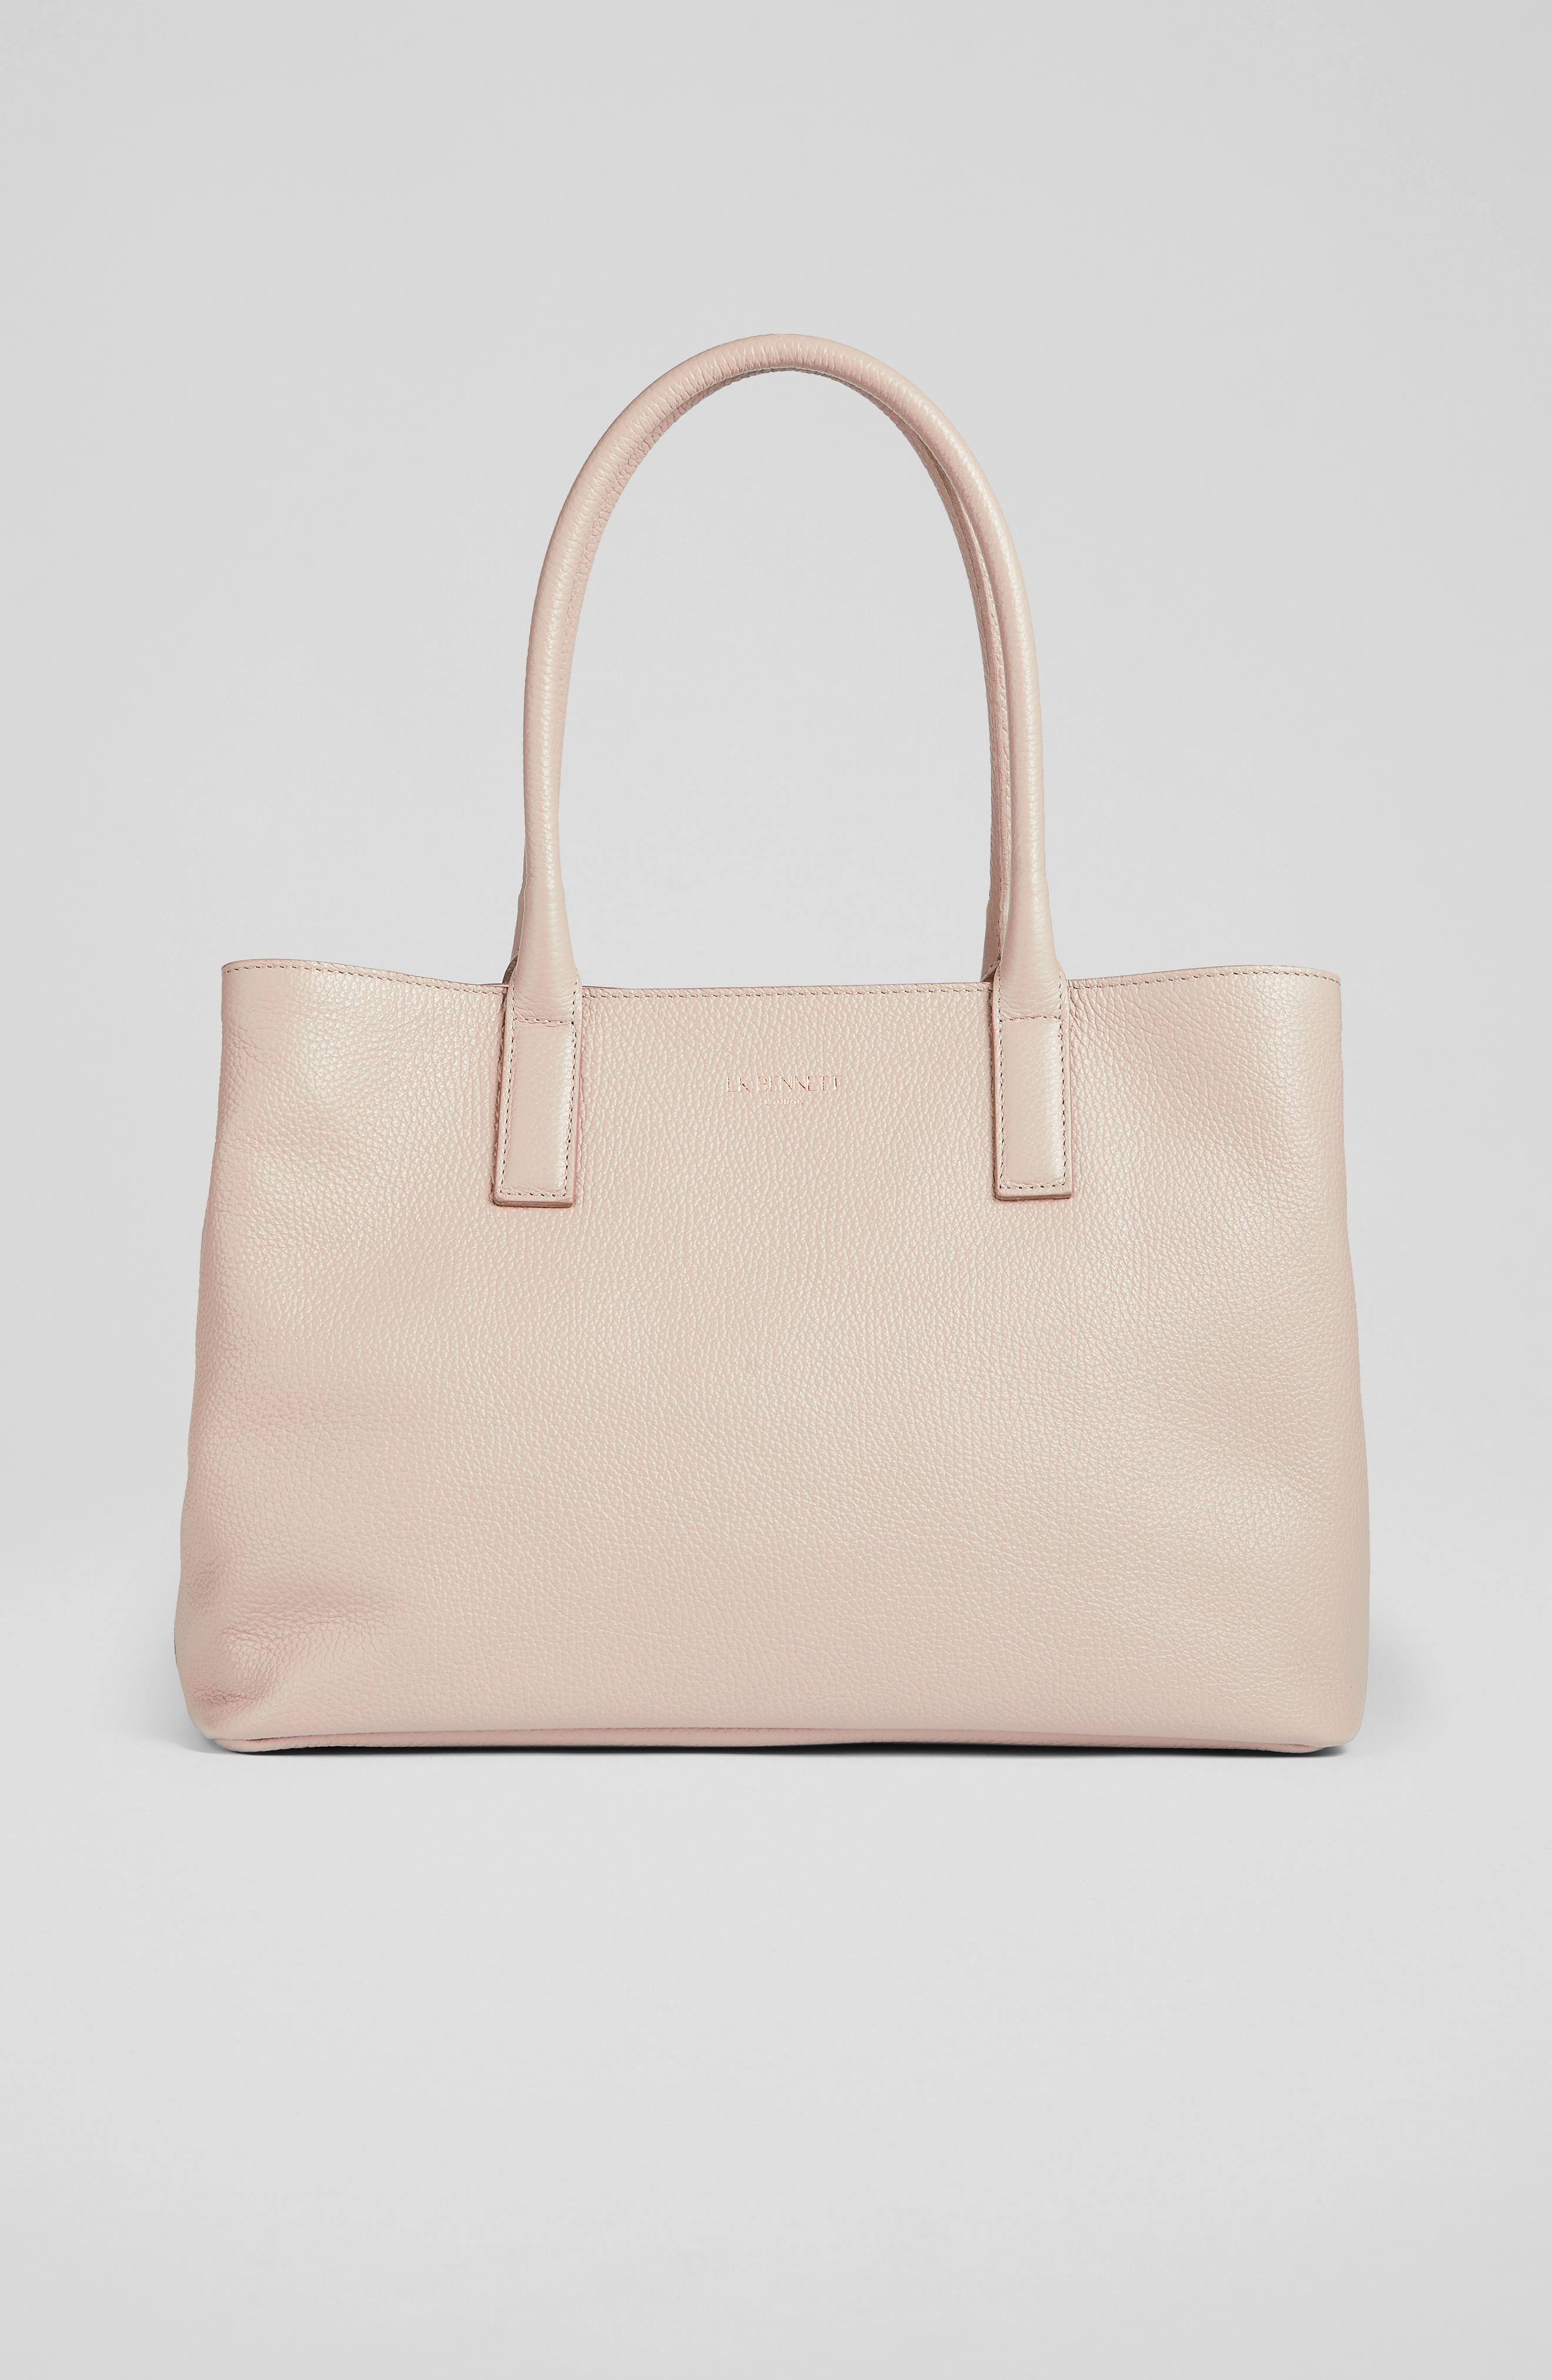 L.K.Bennett Lillian Taupe Grainy Leather Tote Bag Neutral, Neutral